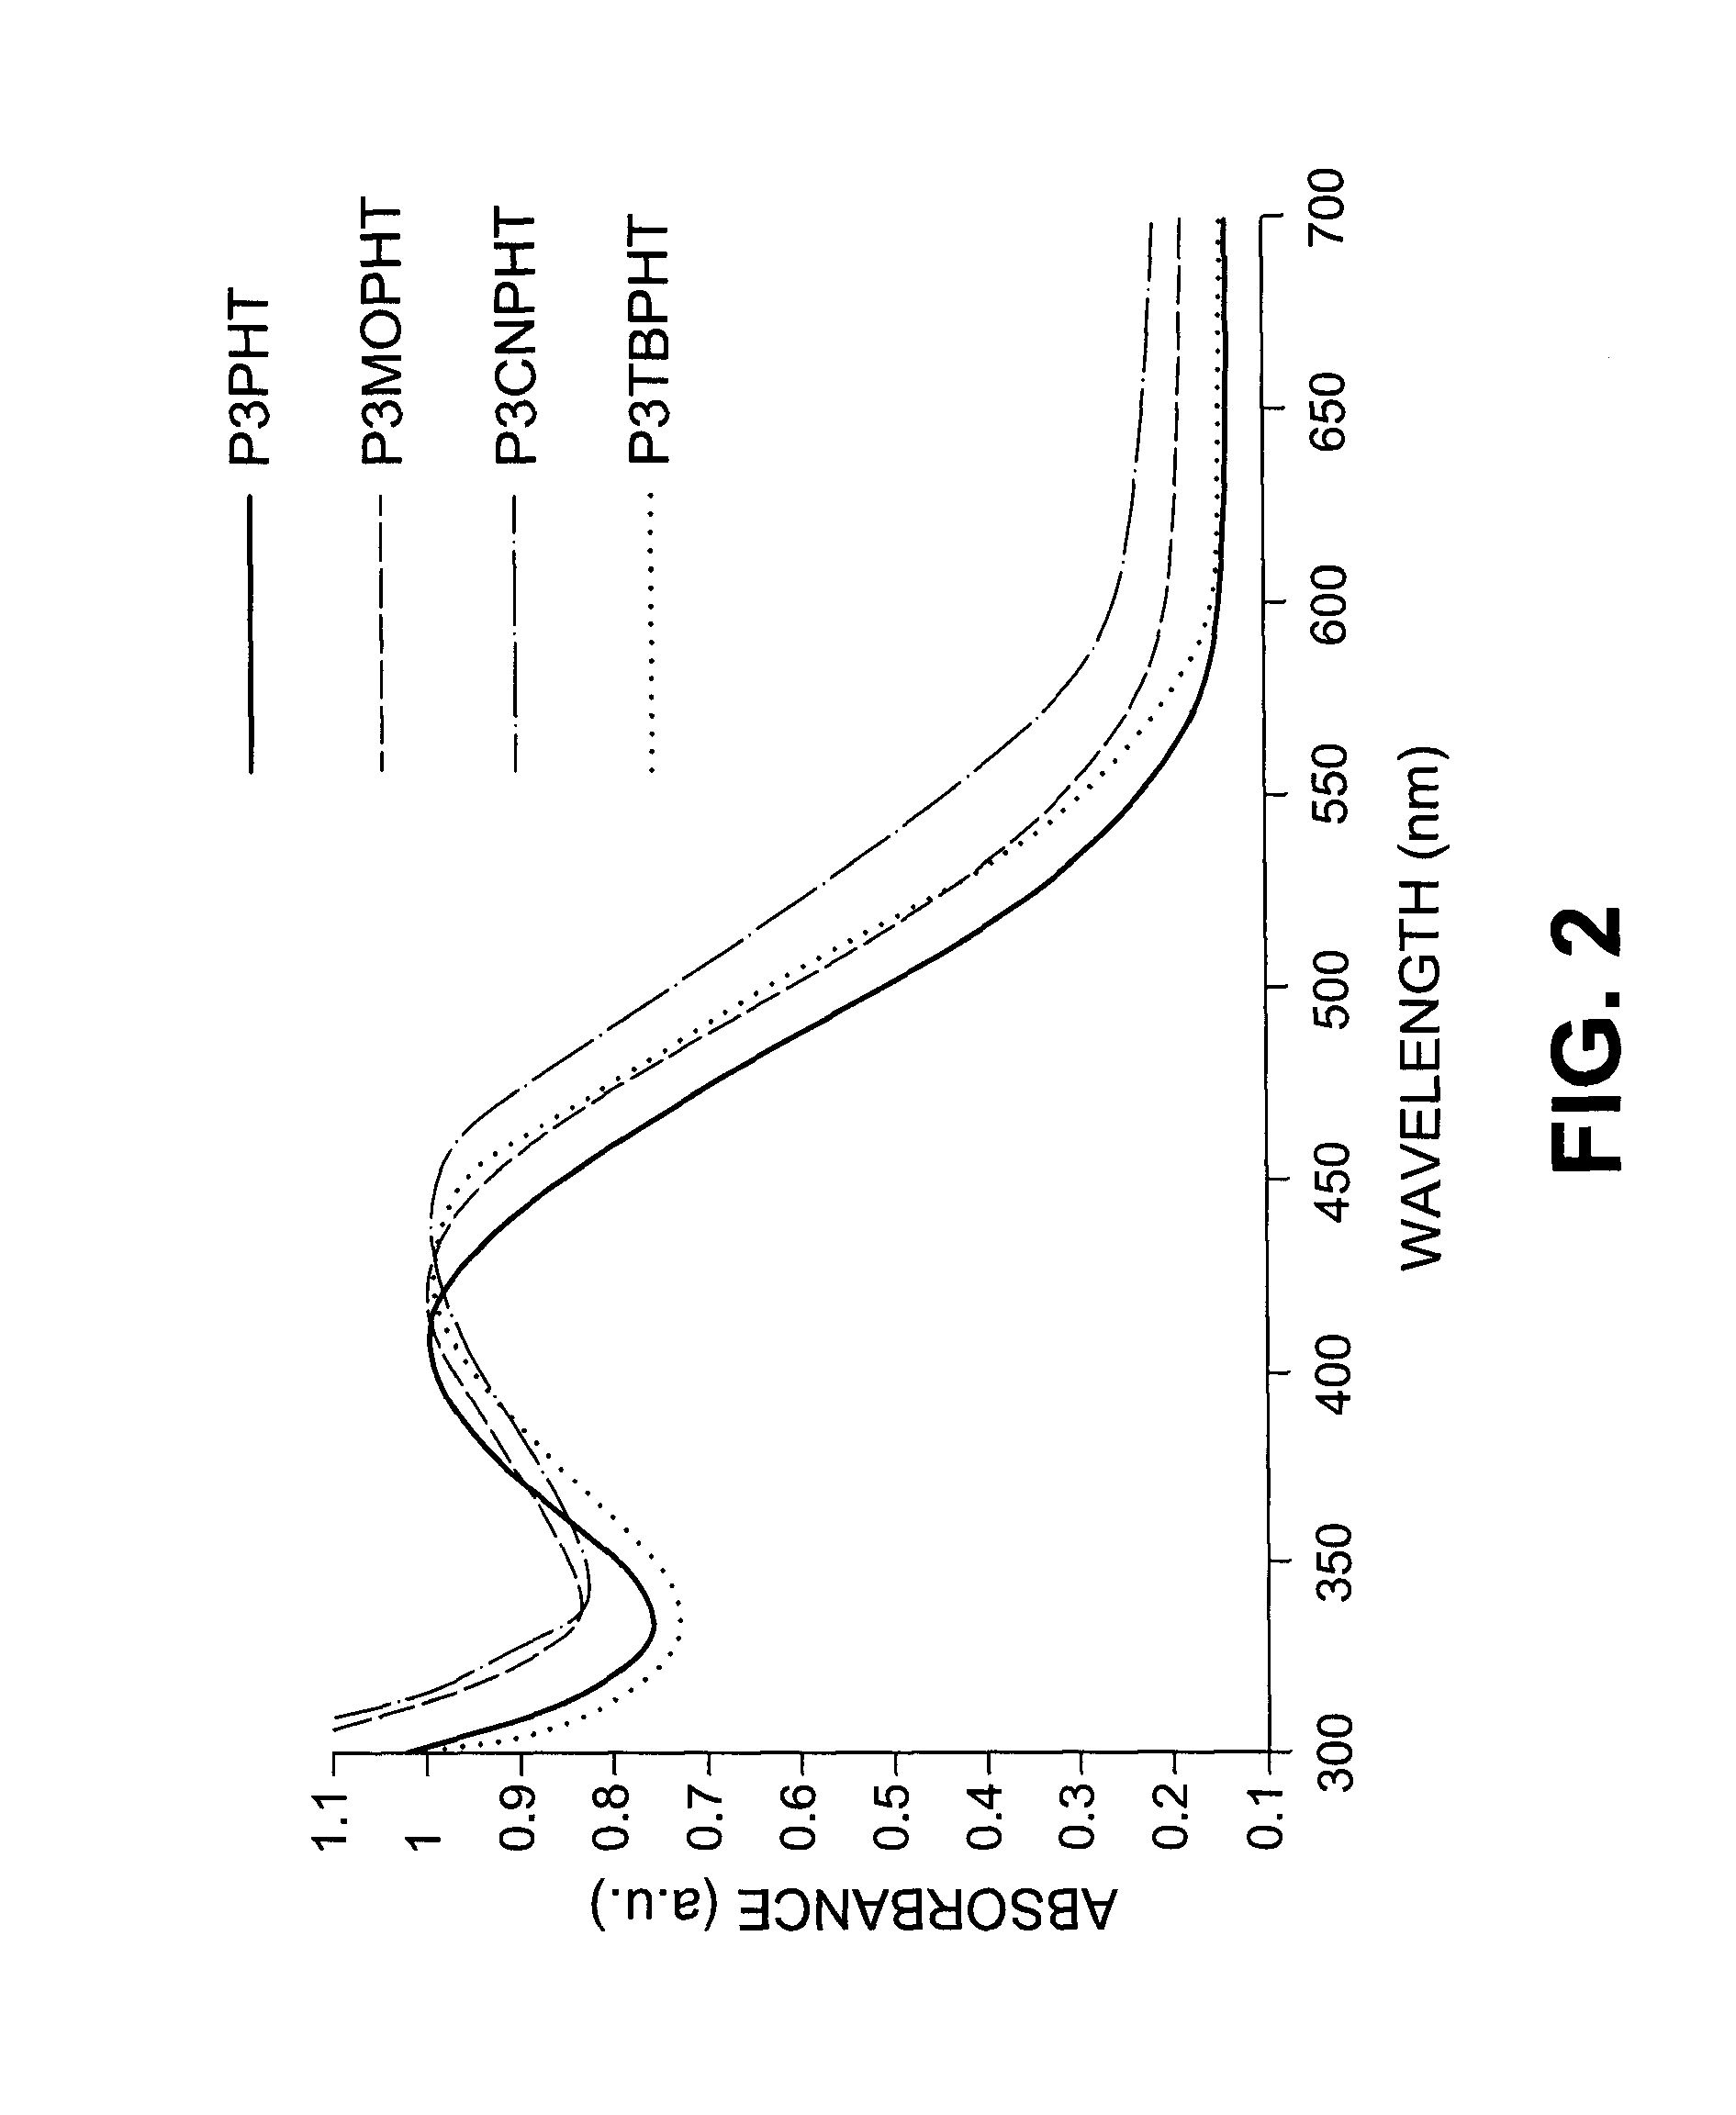 Functionalized Semiconducting Polymers For Use In Organic Photovoltaic Devices